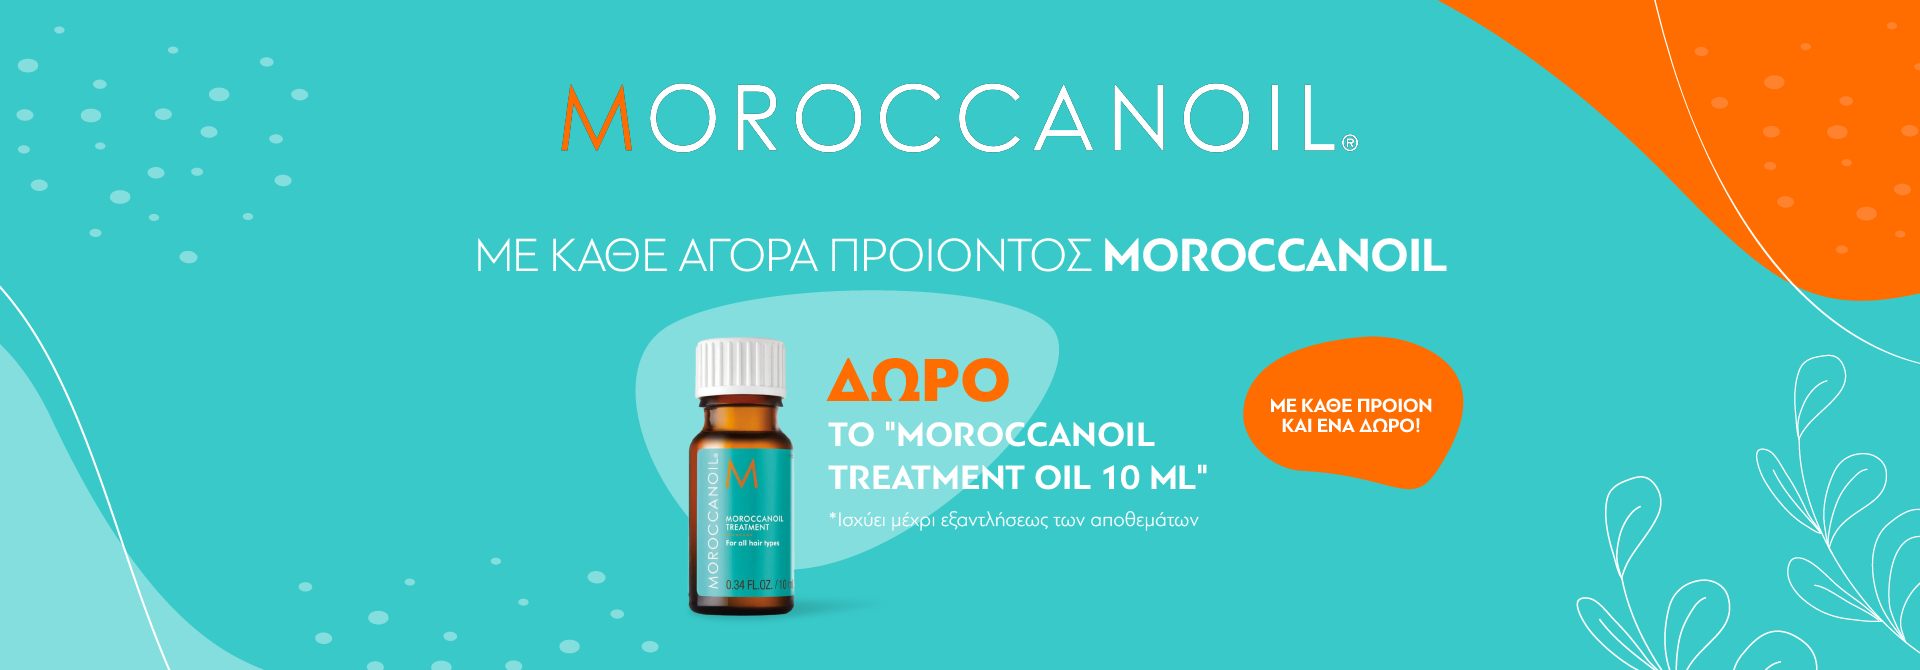 Moroccanoil Oil Treatment Gift - Brand Page